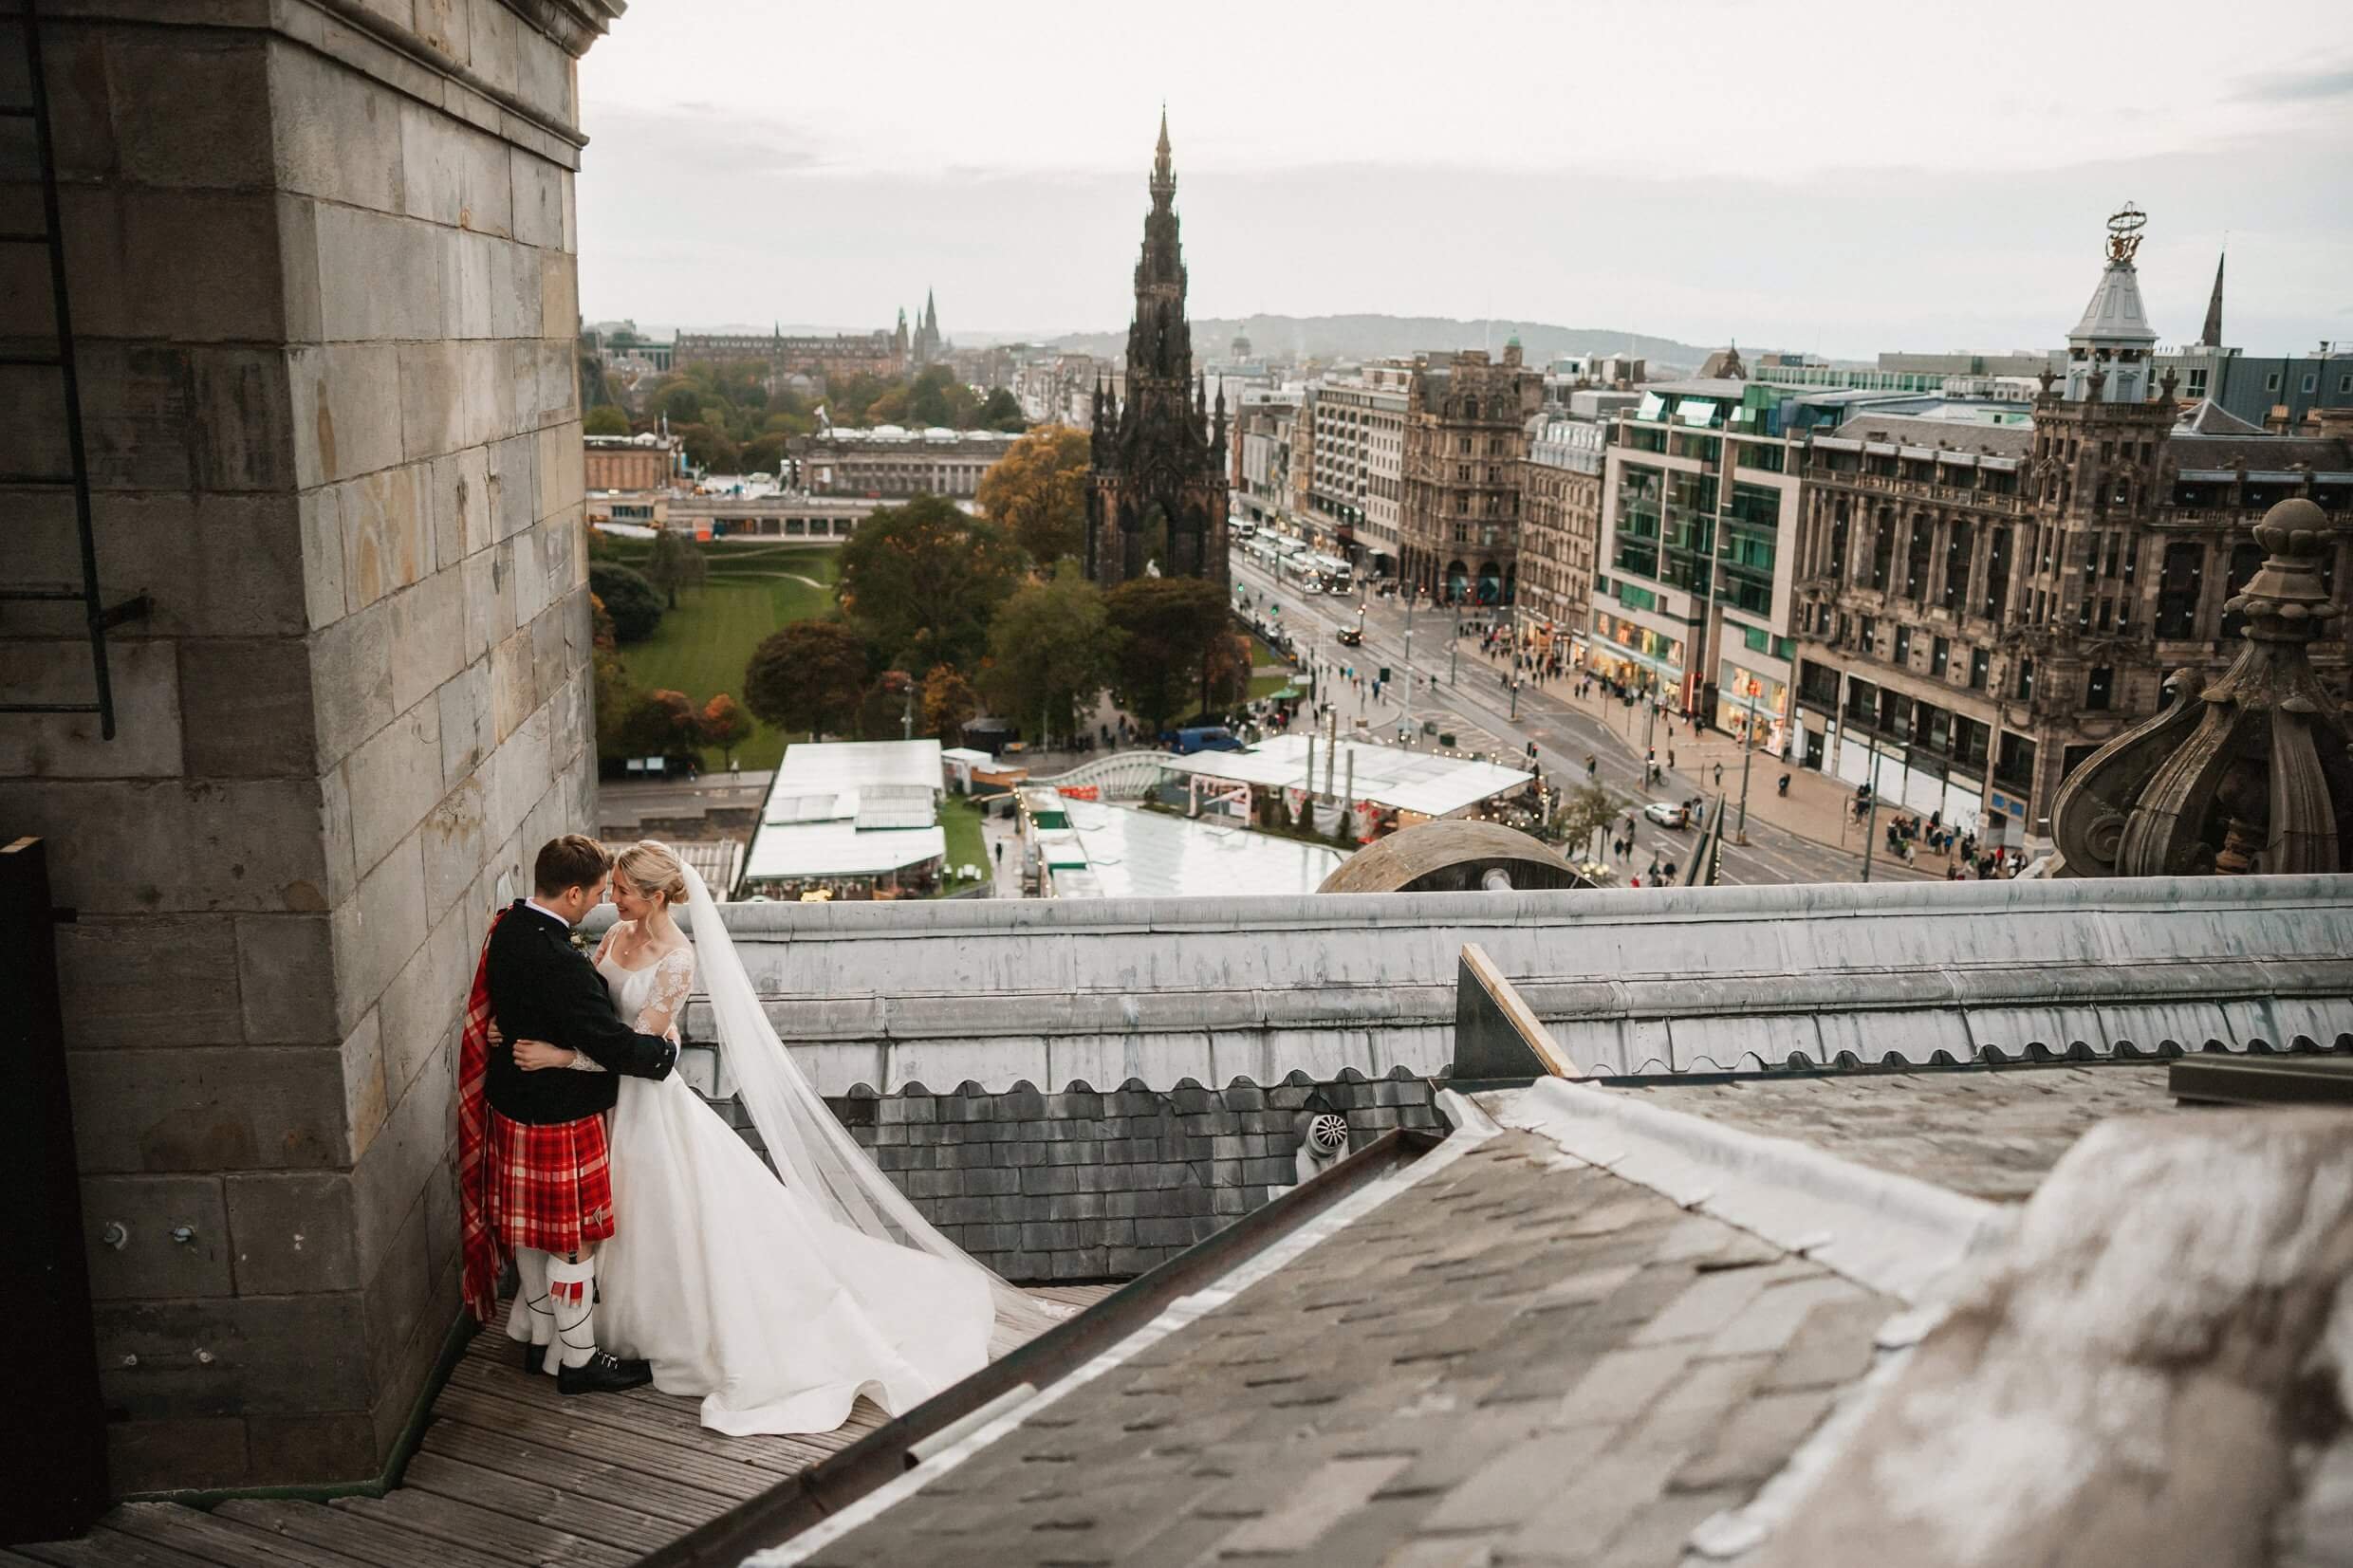 the bride and groom pose for photos on the rooftop of the balmoral hotel edinburgh wedding venue with princes street visible in the background